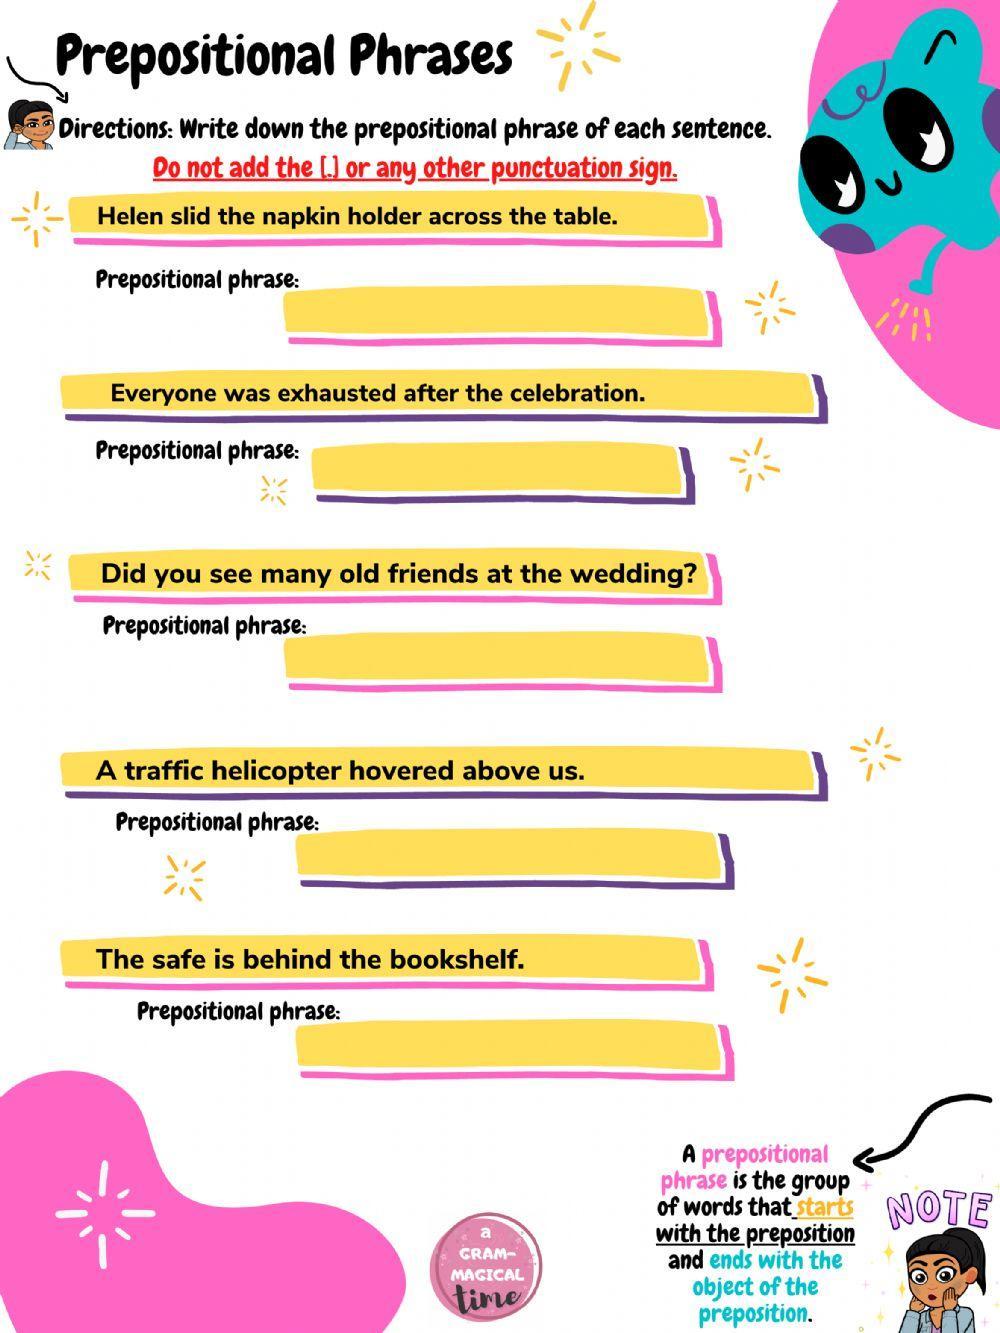 Prepositional Phrases - by Grammagical Time